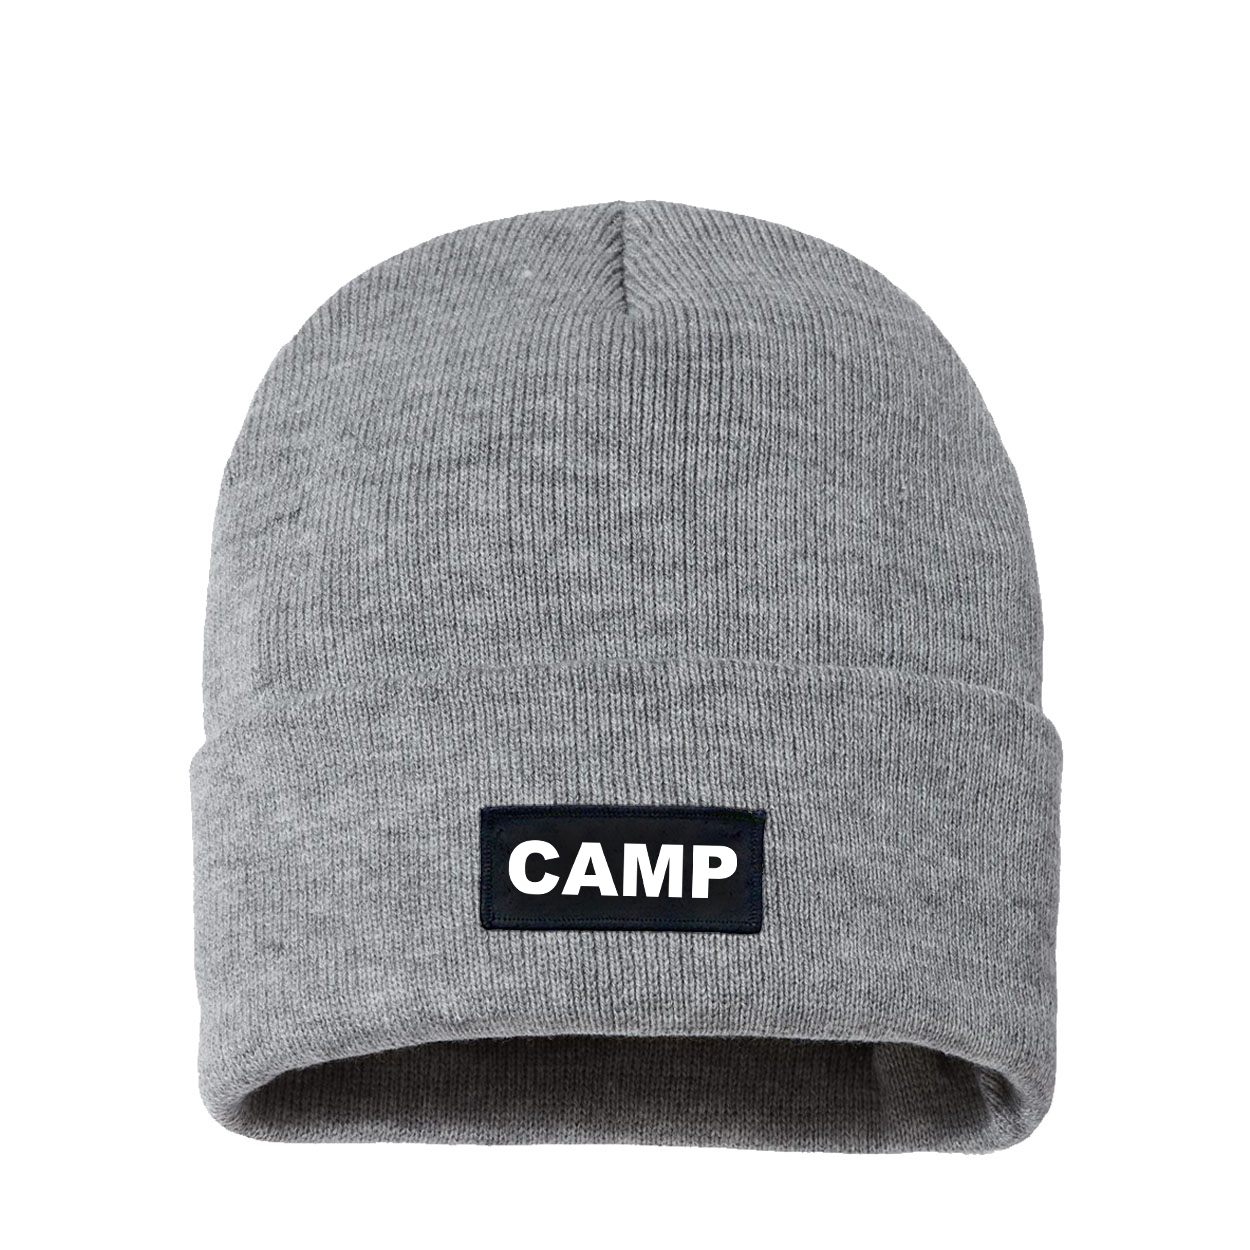 Camp Brand Logo Night Out Woven Patch Sherpa Lined Cuffed Beanie Heather Gray (White Logo)